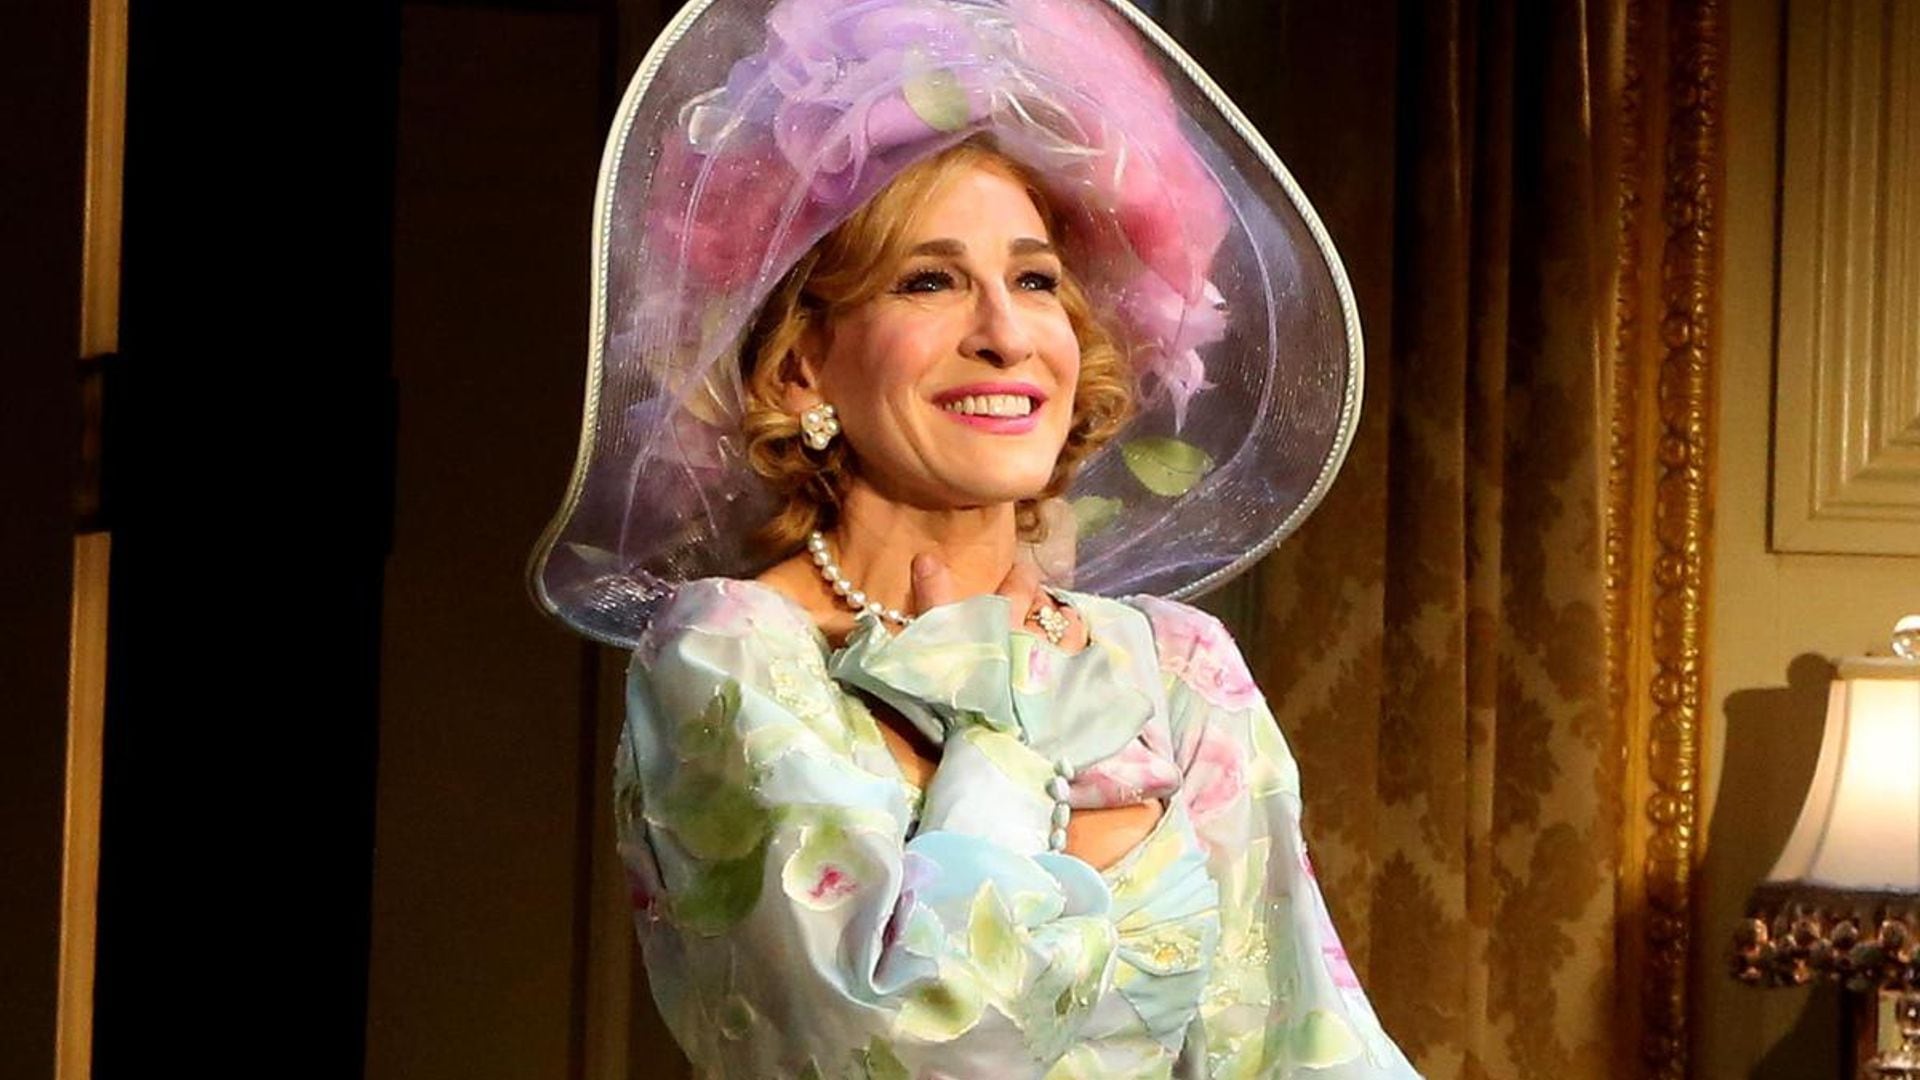 Broadway show ‘Plaza Suite’ canceled after Sarah Jessica Parker contracts COVID-19